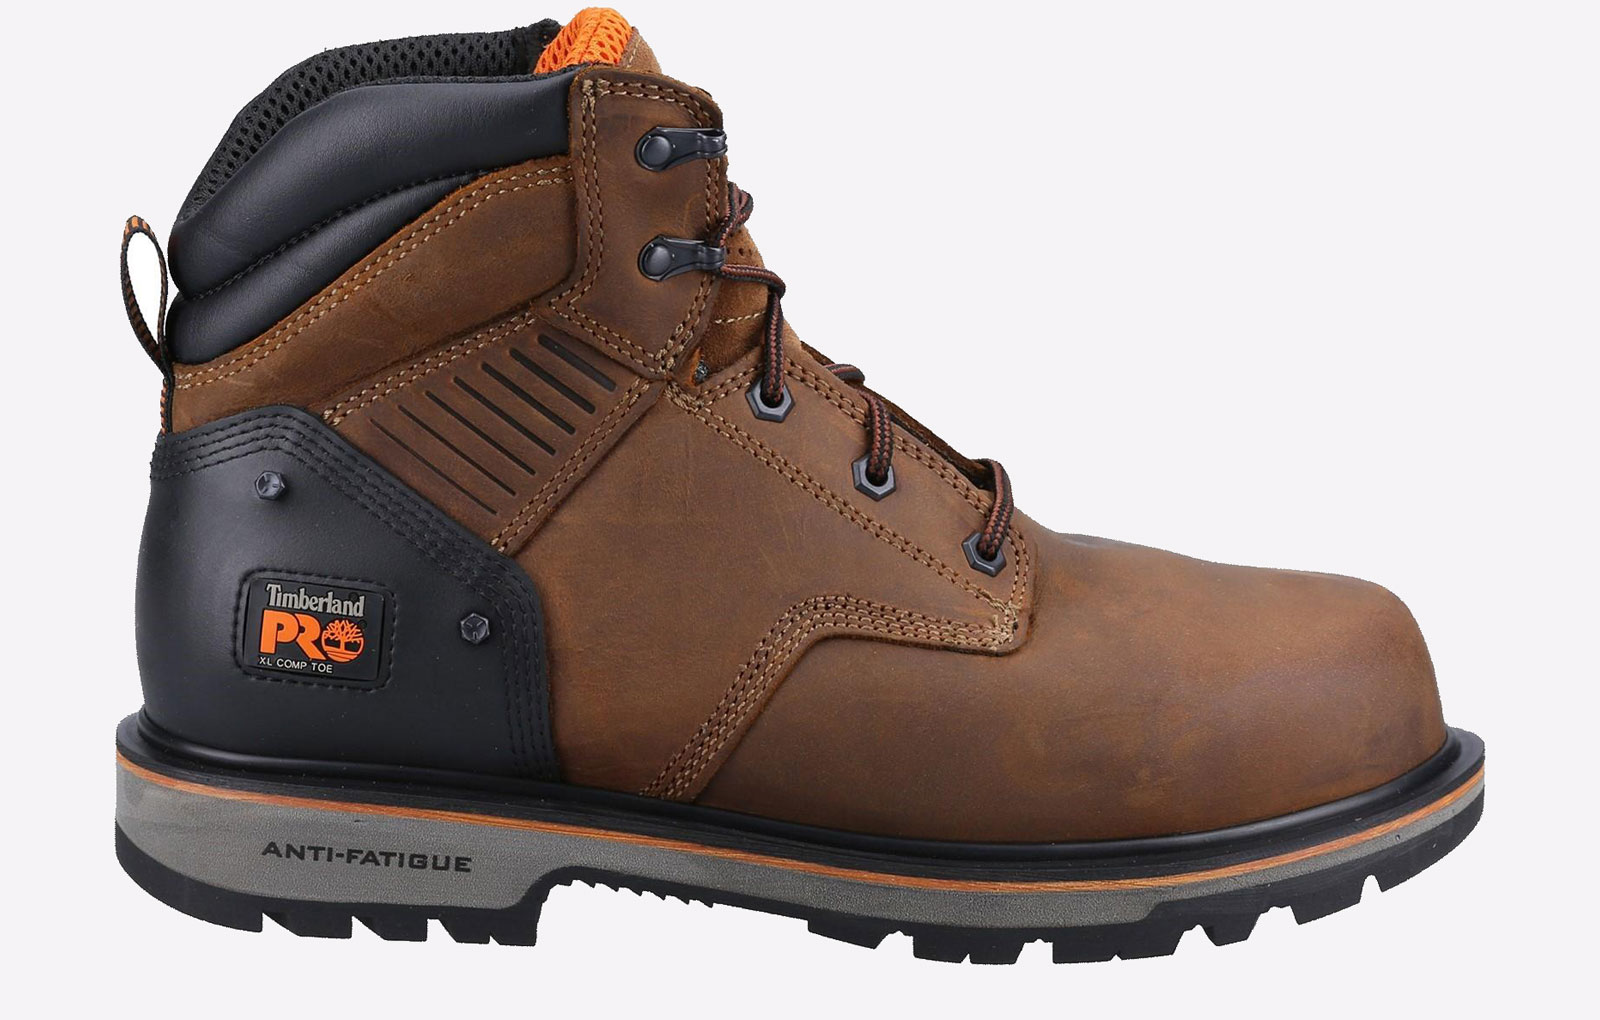 Timberland Pro Ballast Safety Boot Mens - GRD-33958-57986-14